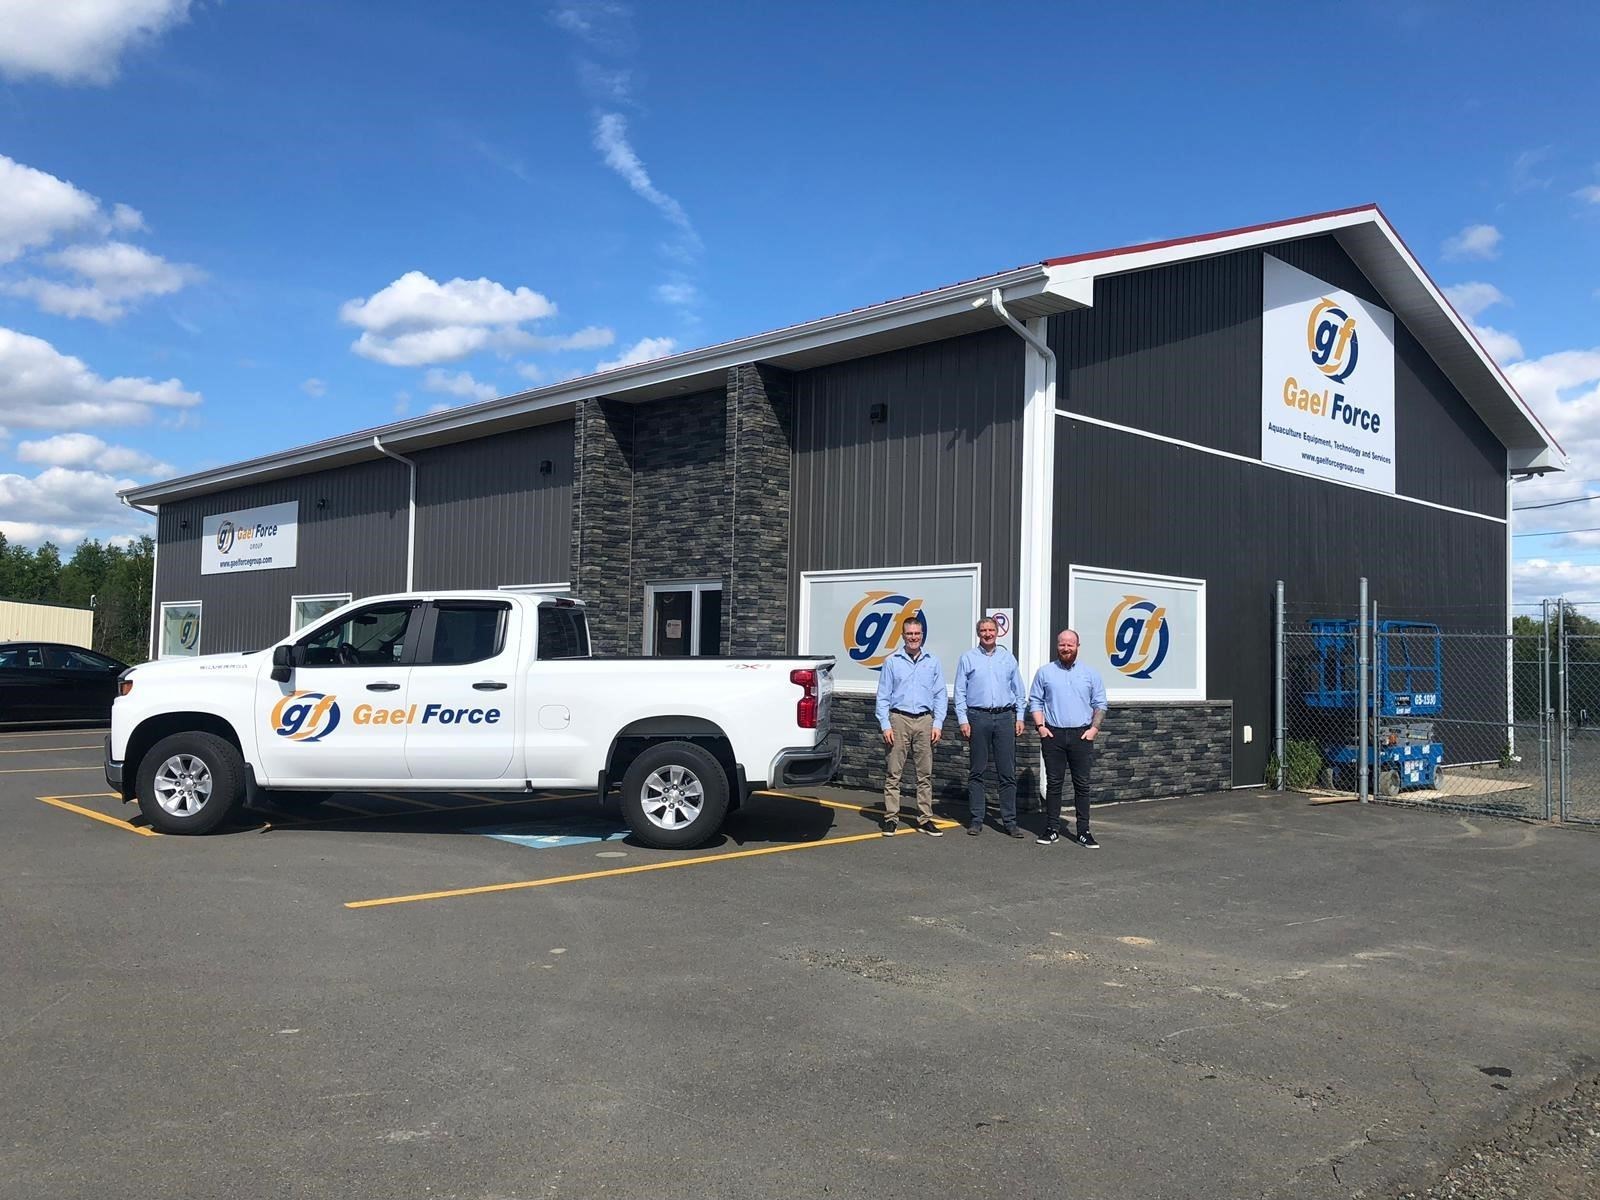 Gael Force managing director Stewart Graham (centre) at the company's Canadian base in Grand Falls-Windsor, Newfoundland, with Gael Force Canada colleagues Darren Lane and Anthony Balmer.